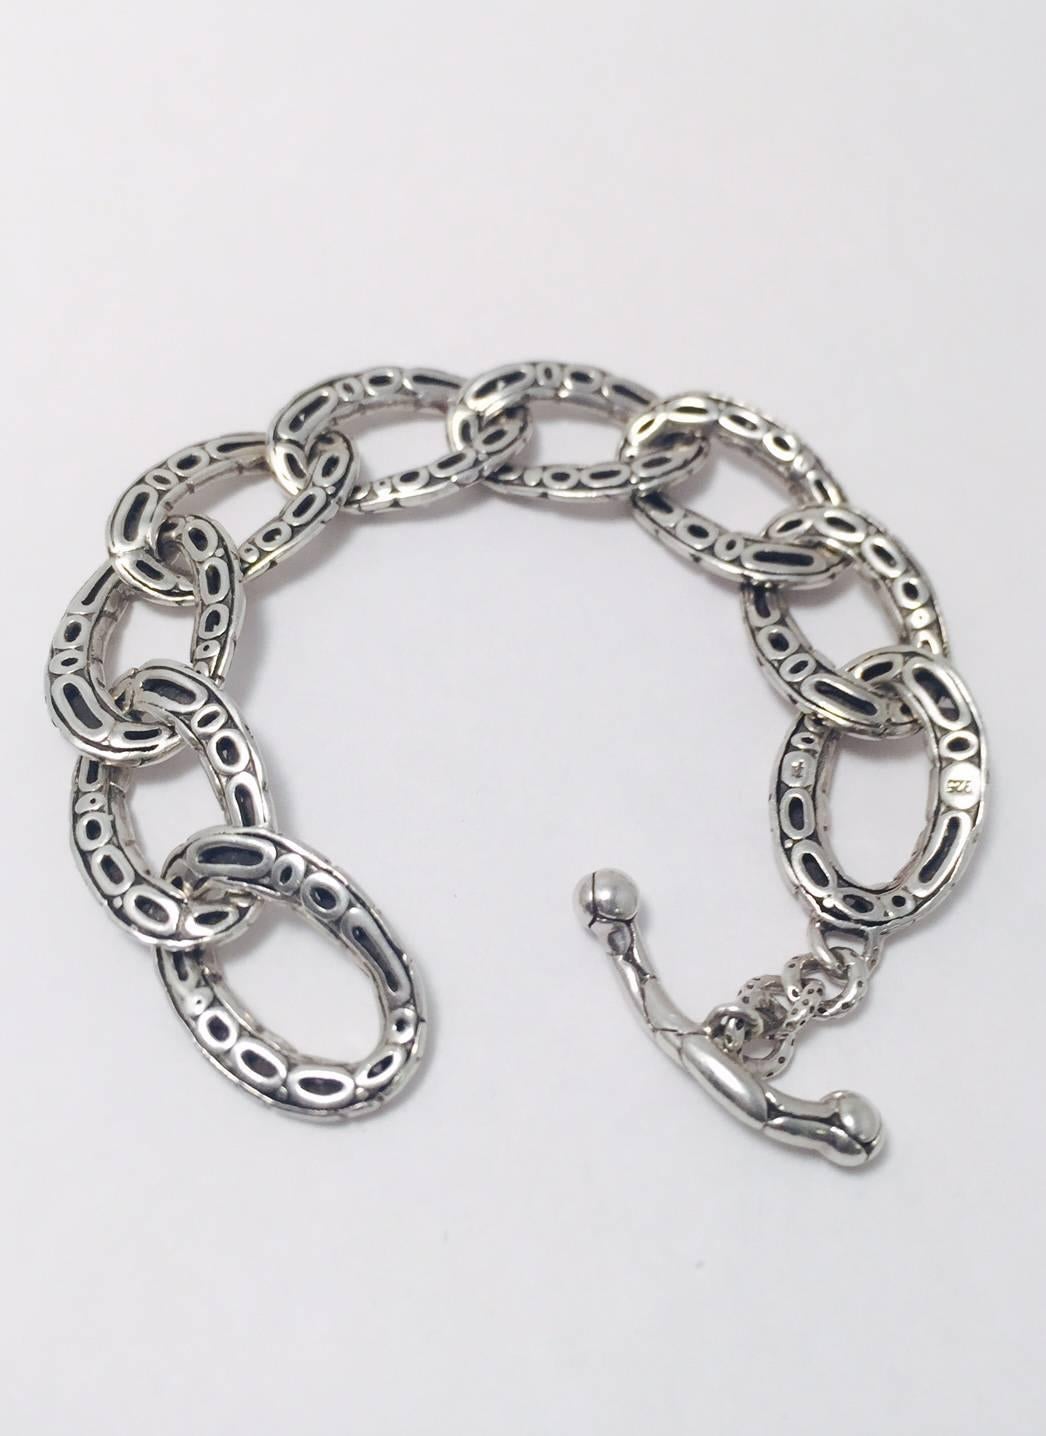 John Hardy works magic with Sterling Silver!  His pieces are highly collectible world wide.  This beautiful link bracelet, from his Kali collection, features nine interlocking links and an easy to handle toggle clasp.  Measures 7.25" long and